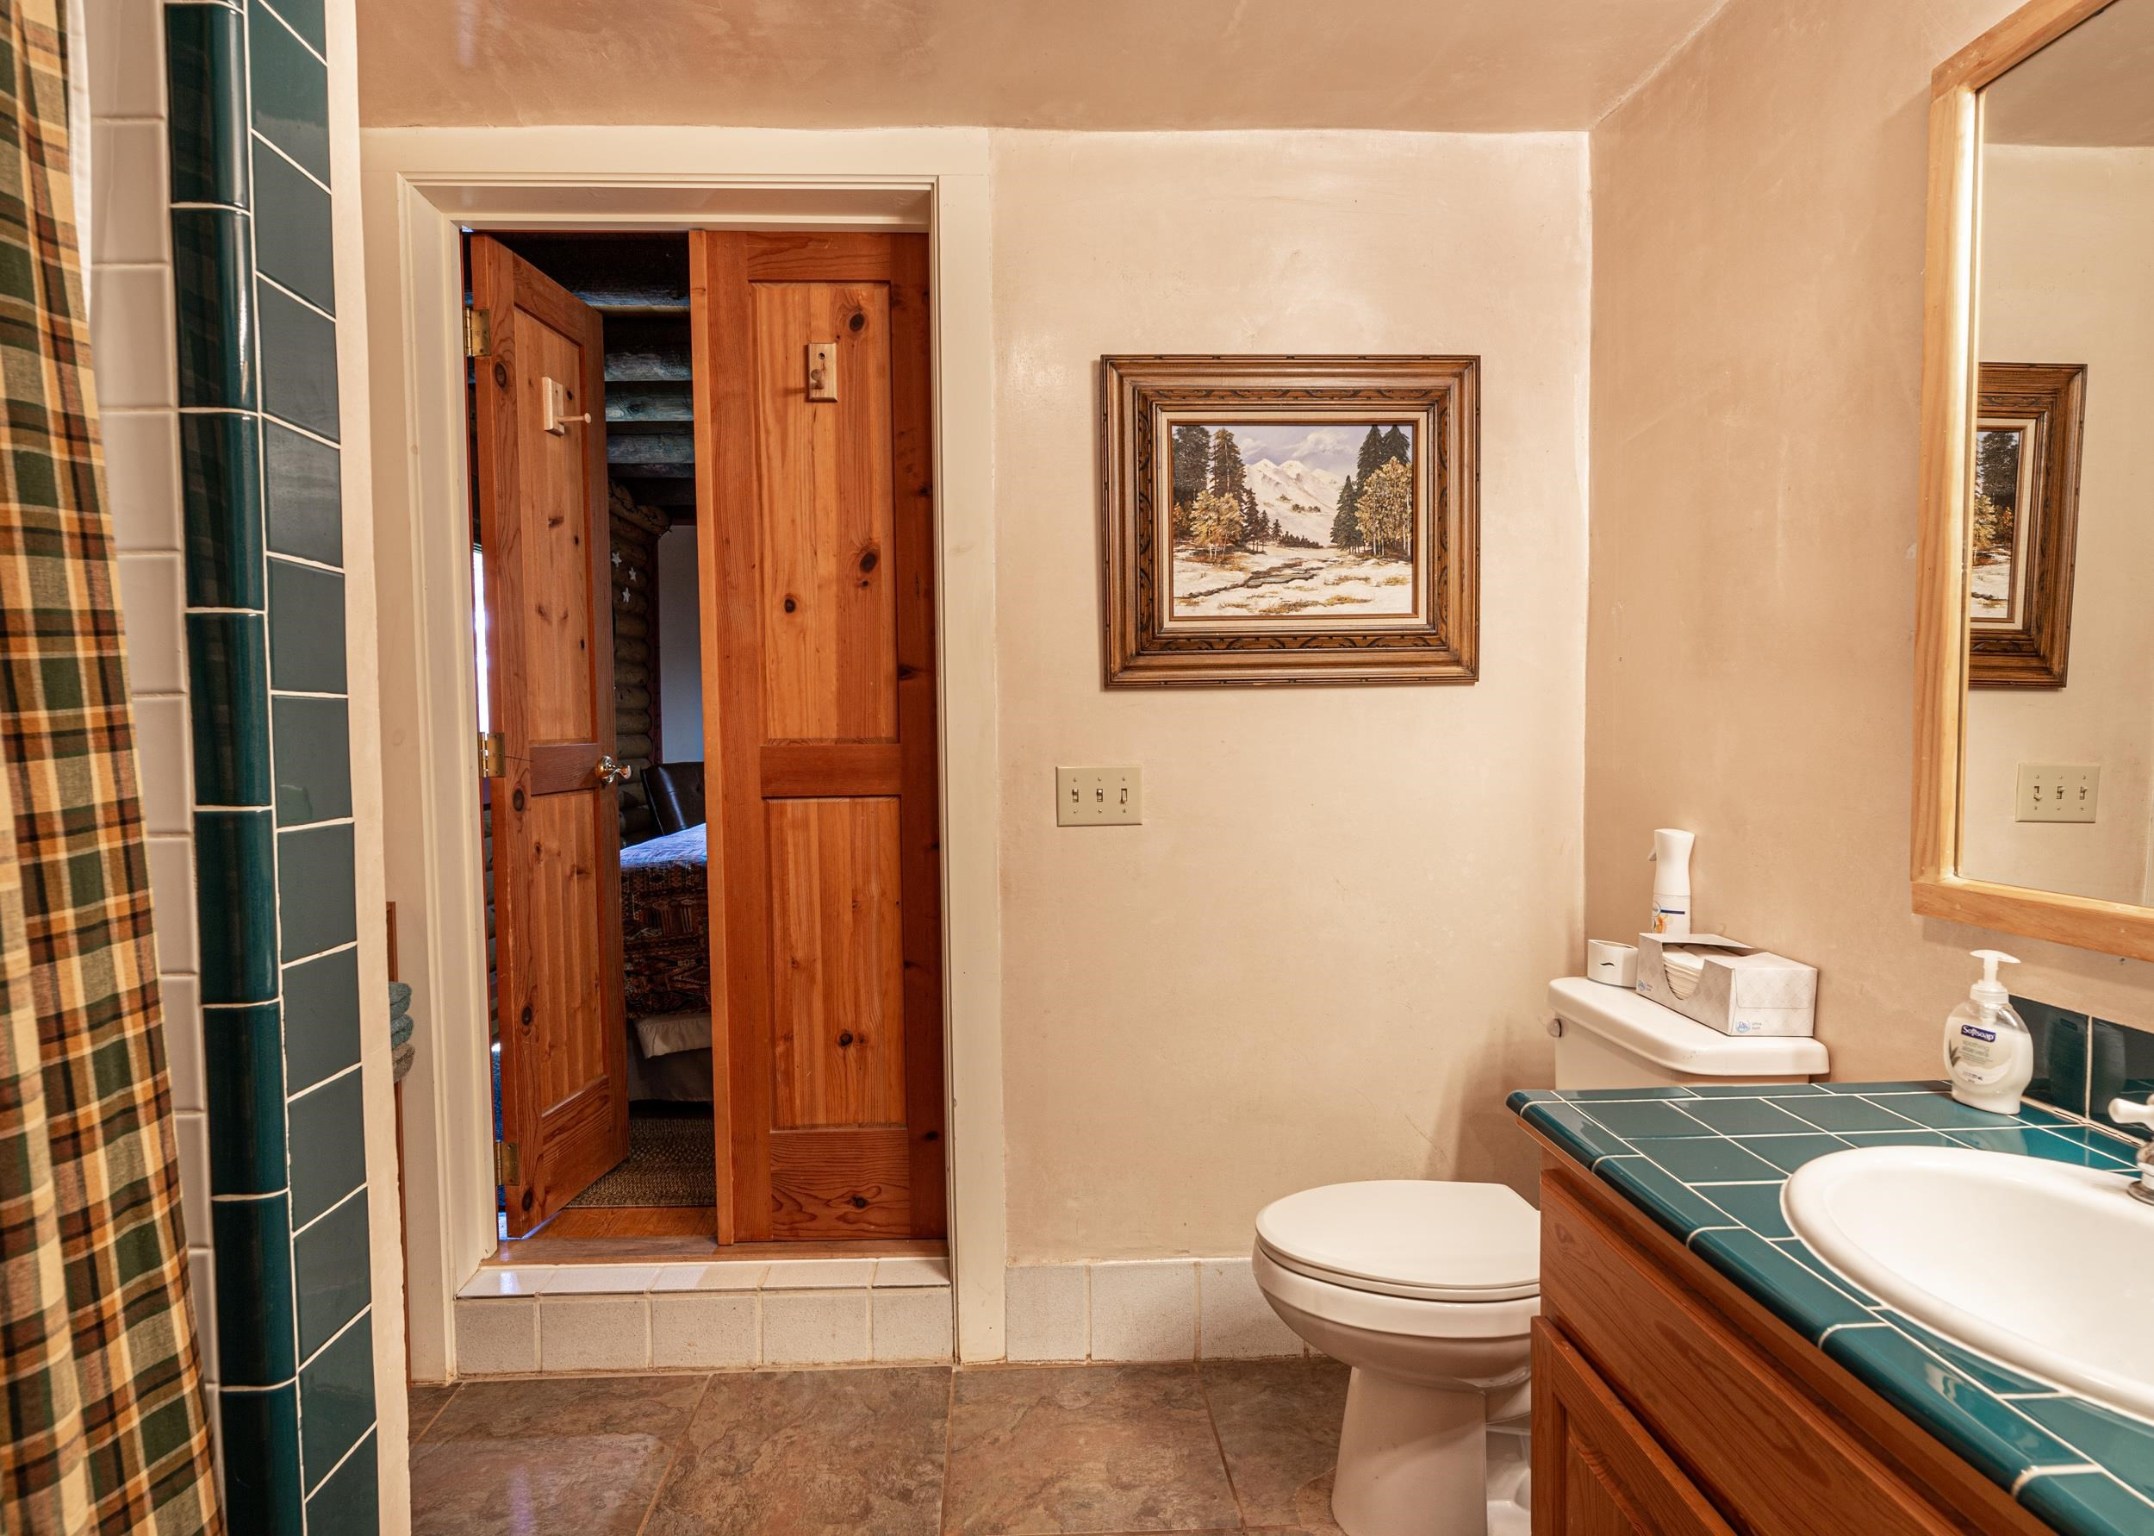 7 Log House Road, Glorieta, New Mexico 87535, 2 Bedrooms Bedrooms, ,2 BathroomsBathrooms,Residential,For Sale,7 Log House Road,202201998